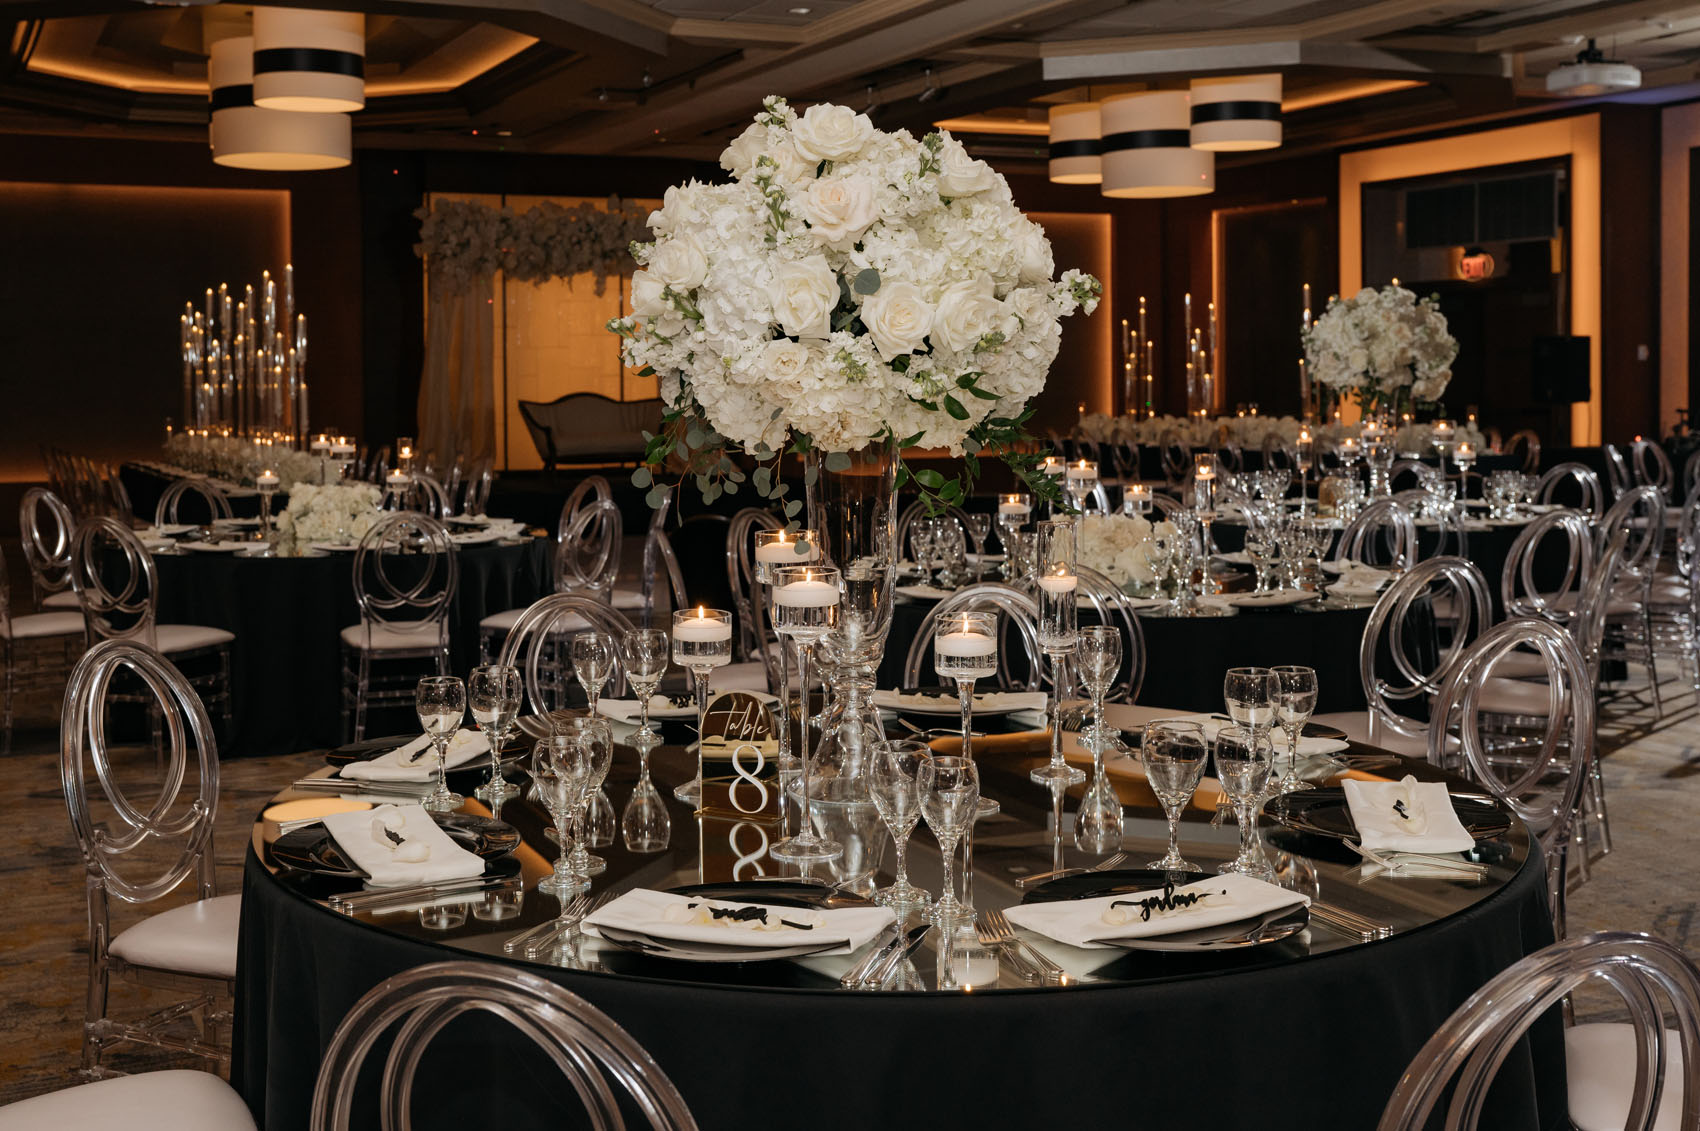 A variety of vibrant tall and low white centerpiece poofs designed by Flora Nova decorate the black tables of the ballroom.